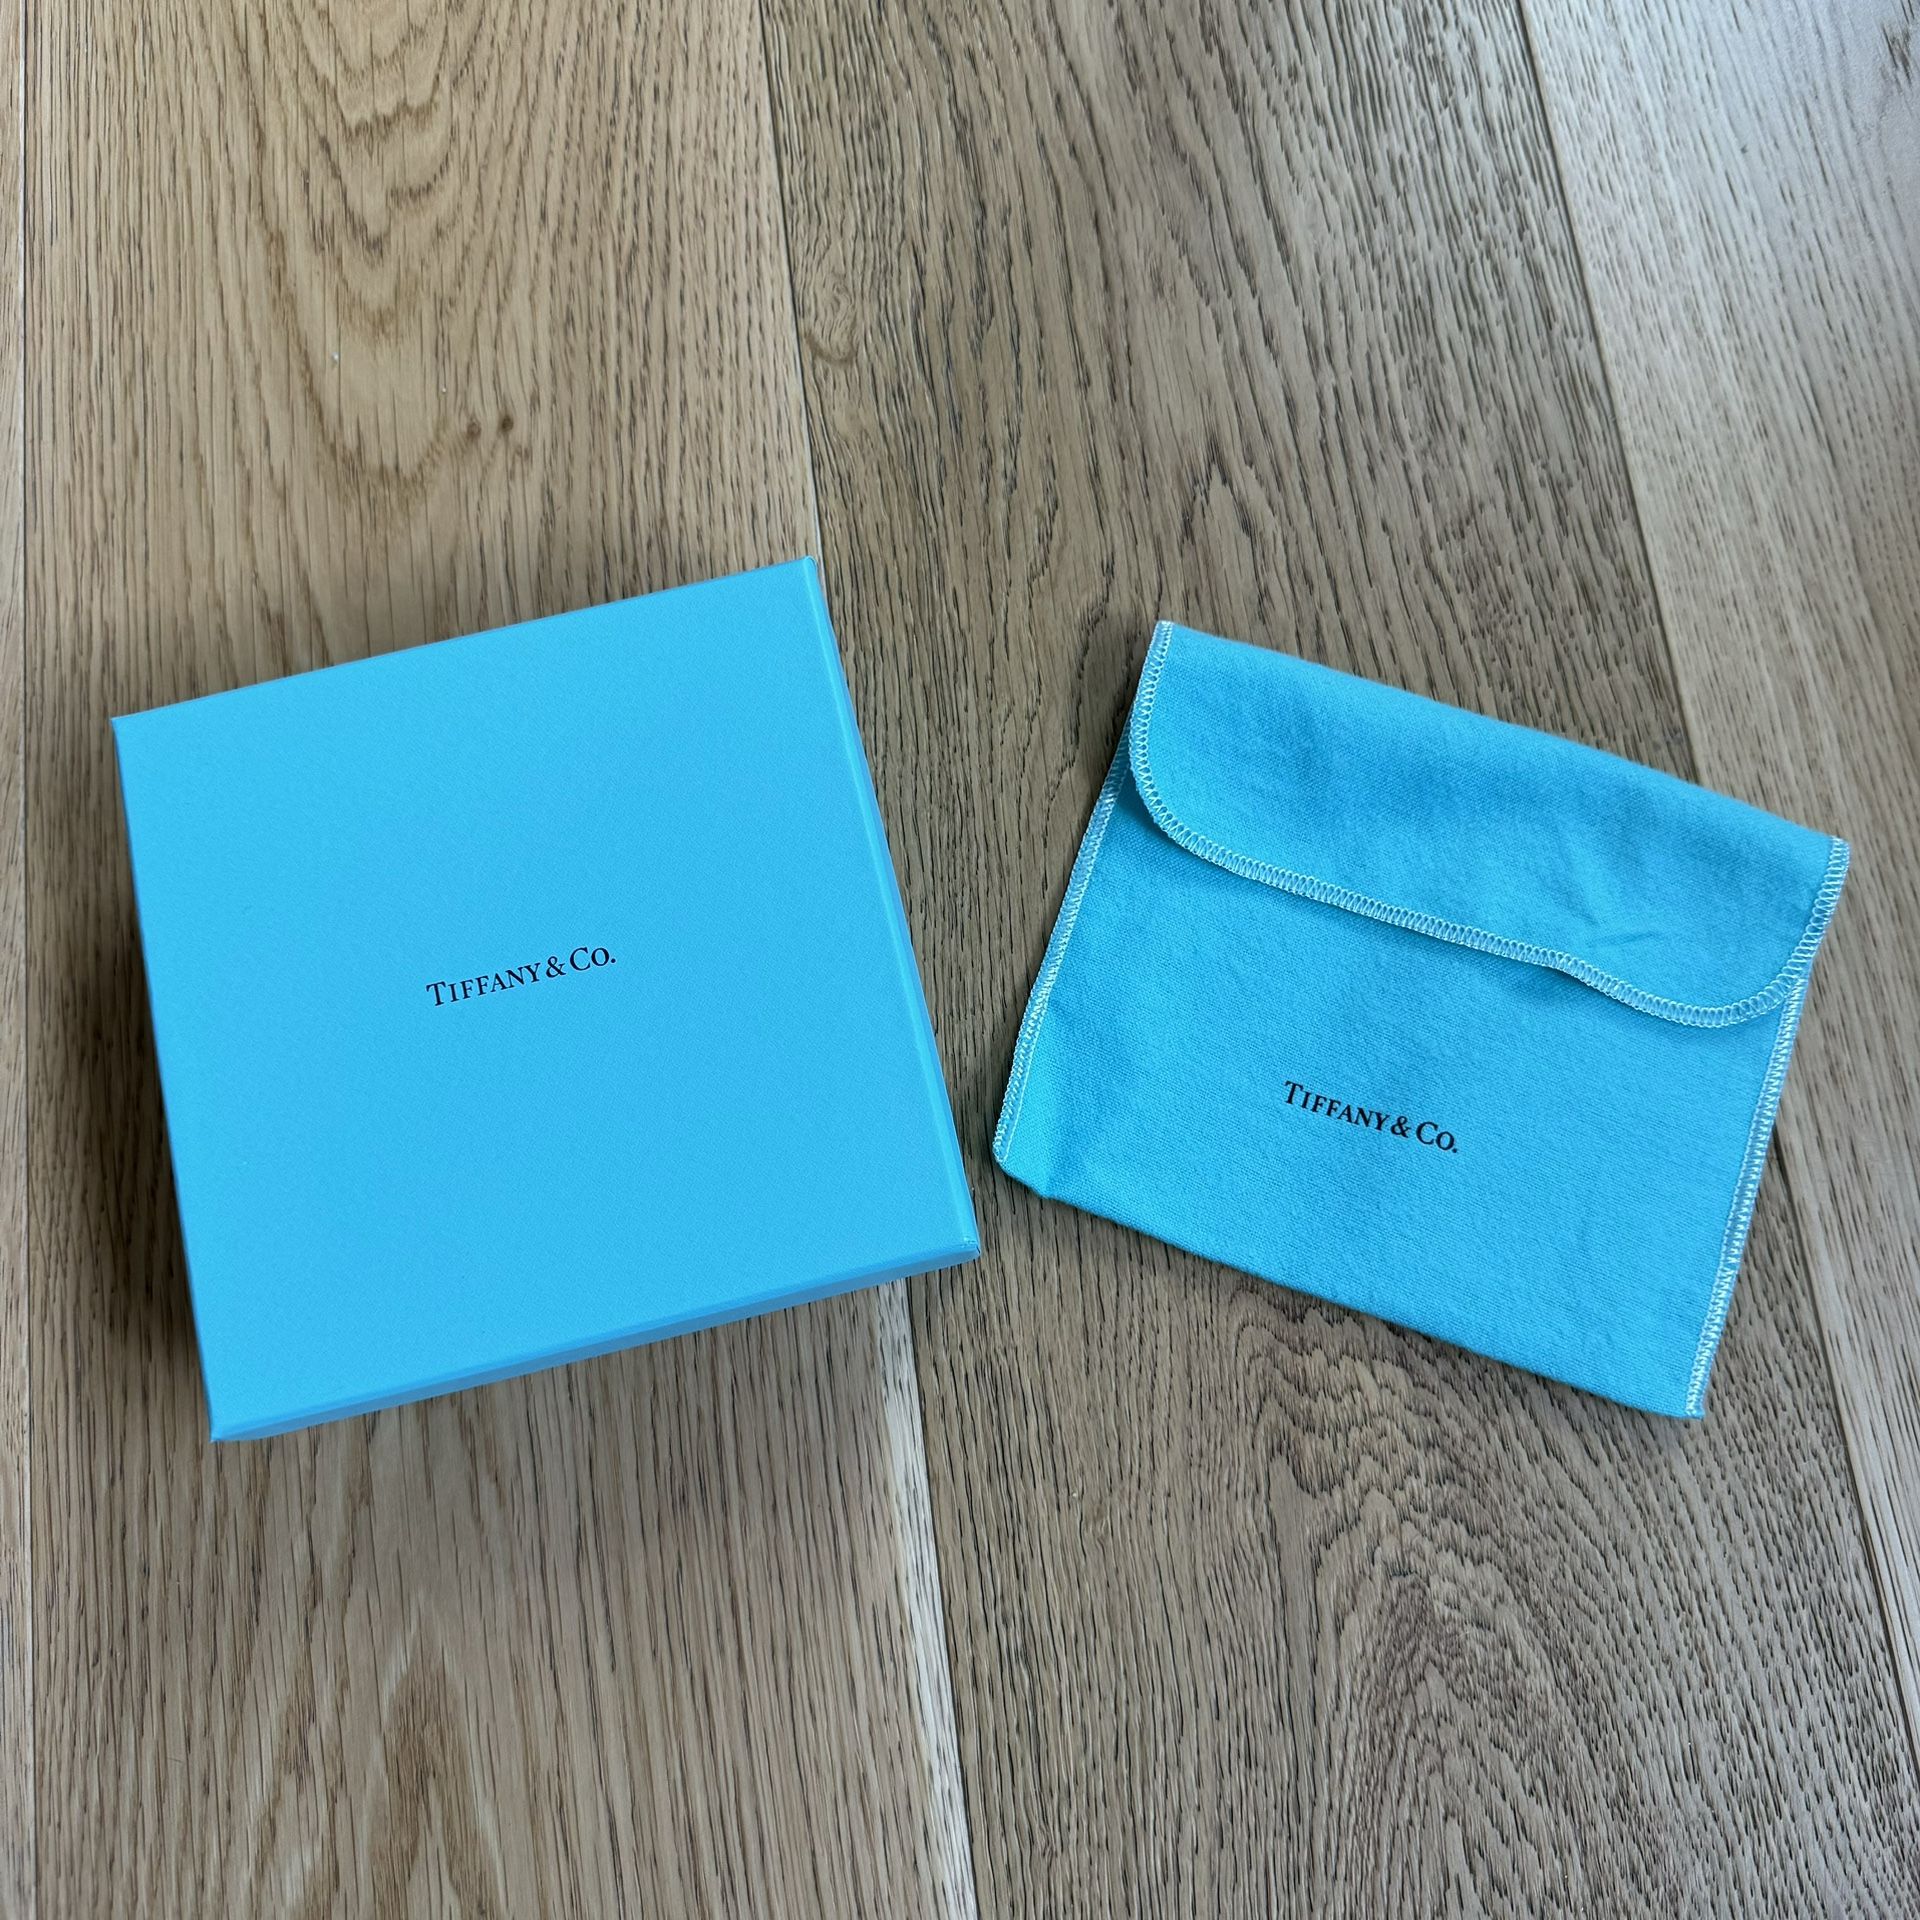 TIFFANY & CO. DUSTBAG JEWELRY POUCH AND BOX AUTHENTIC